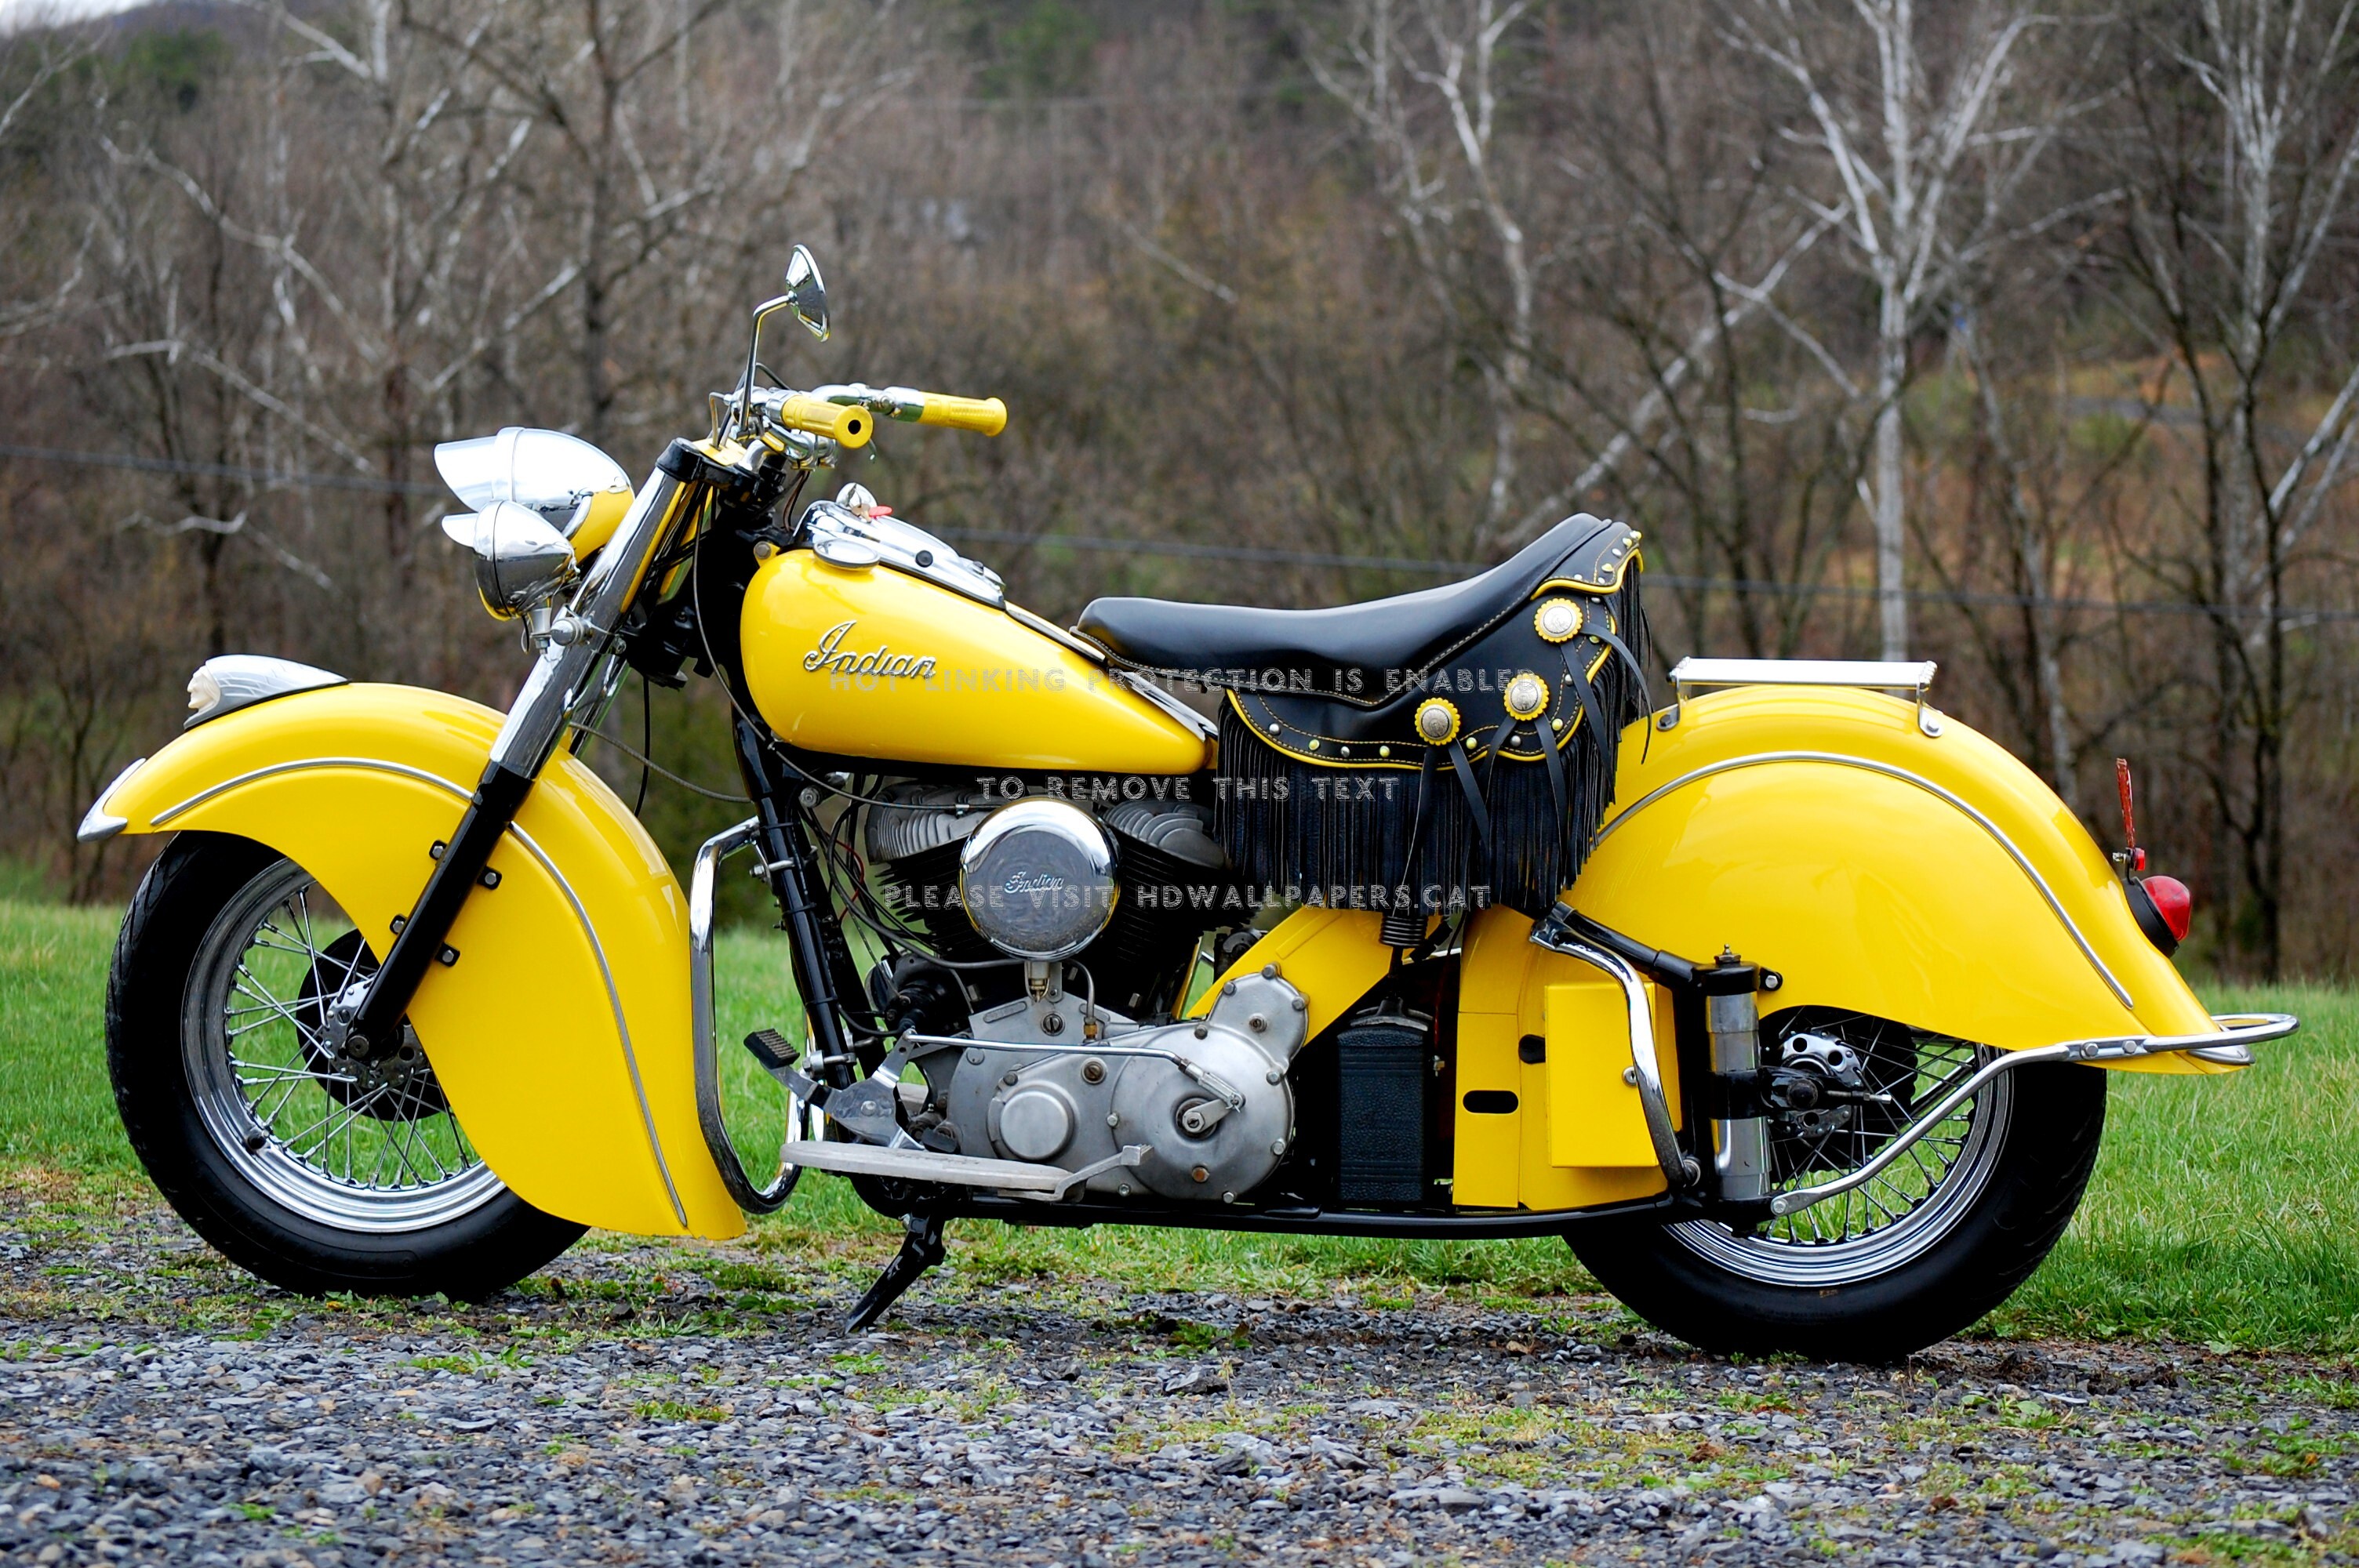 1951 Indian Chief Bike Yellow Vintage Cycle - Indian Chief Motorcycle - HD Wallpaper 